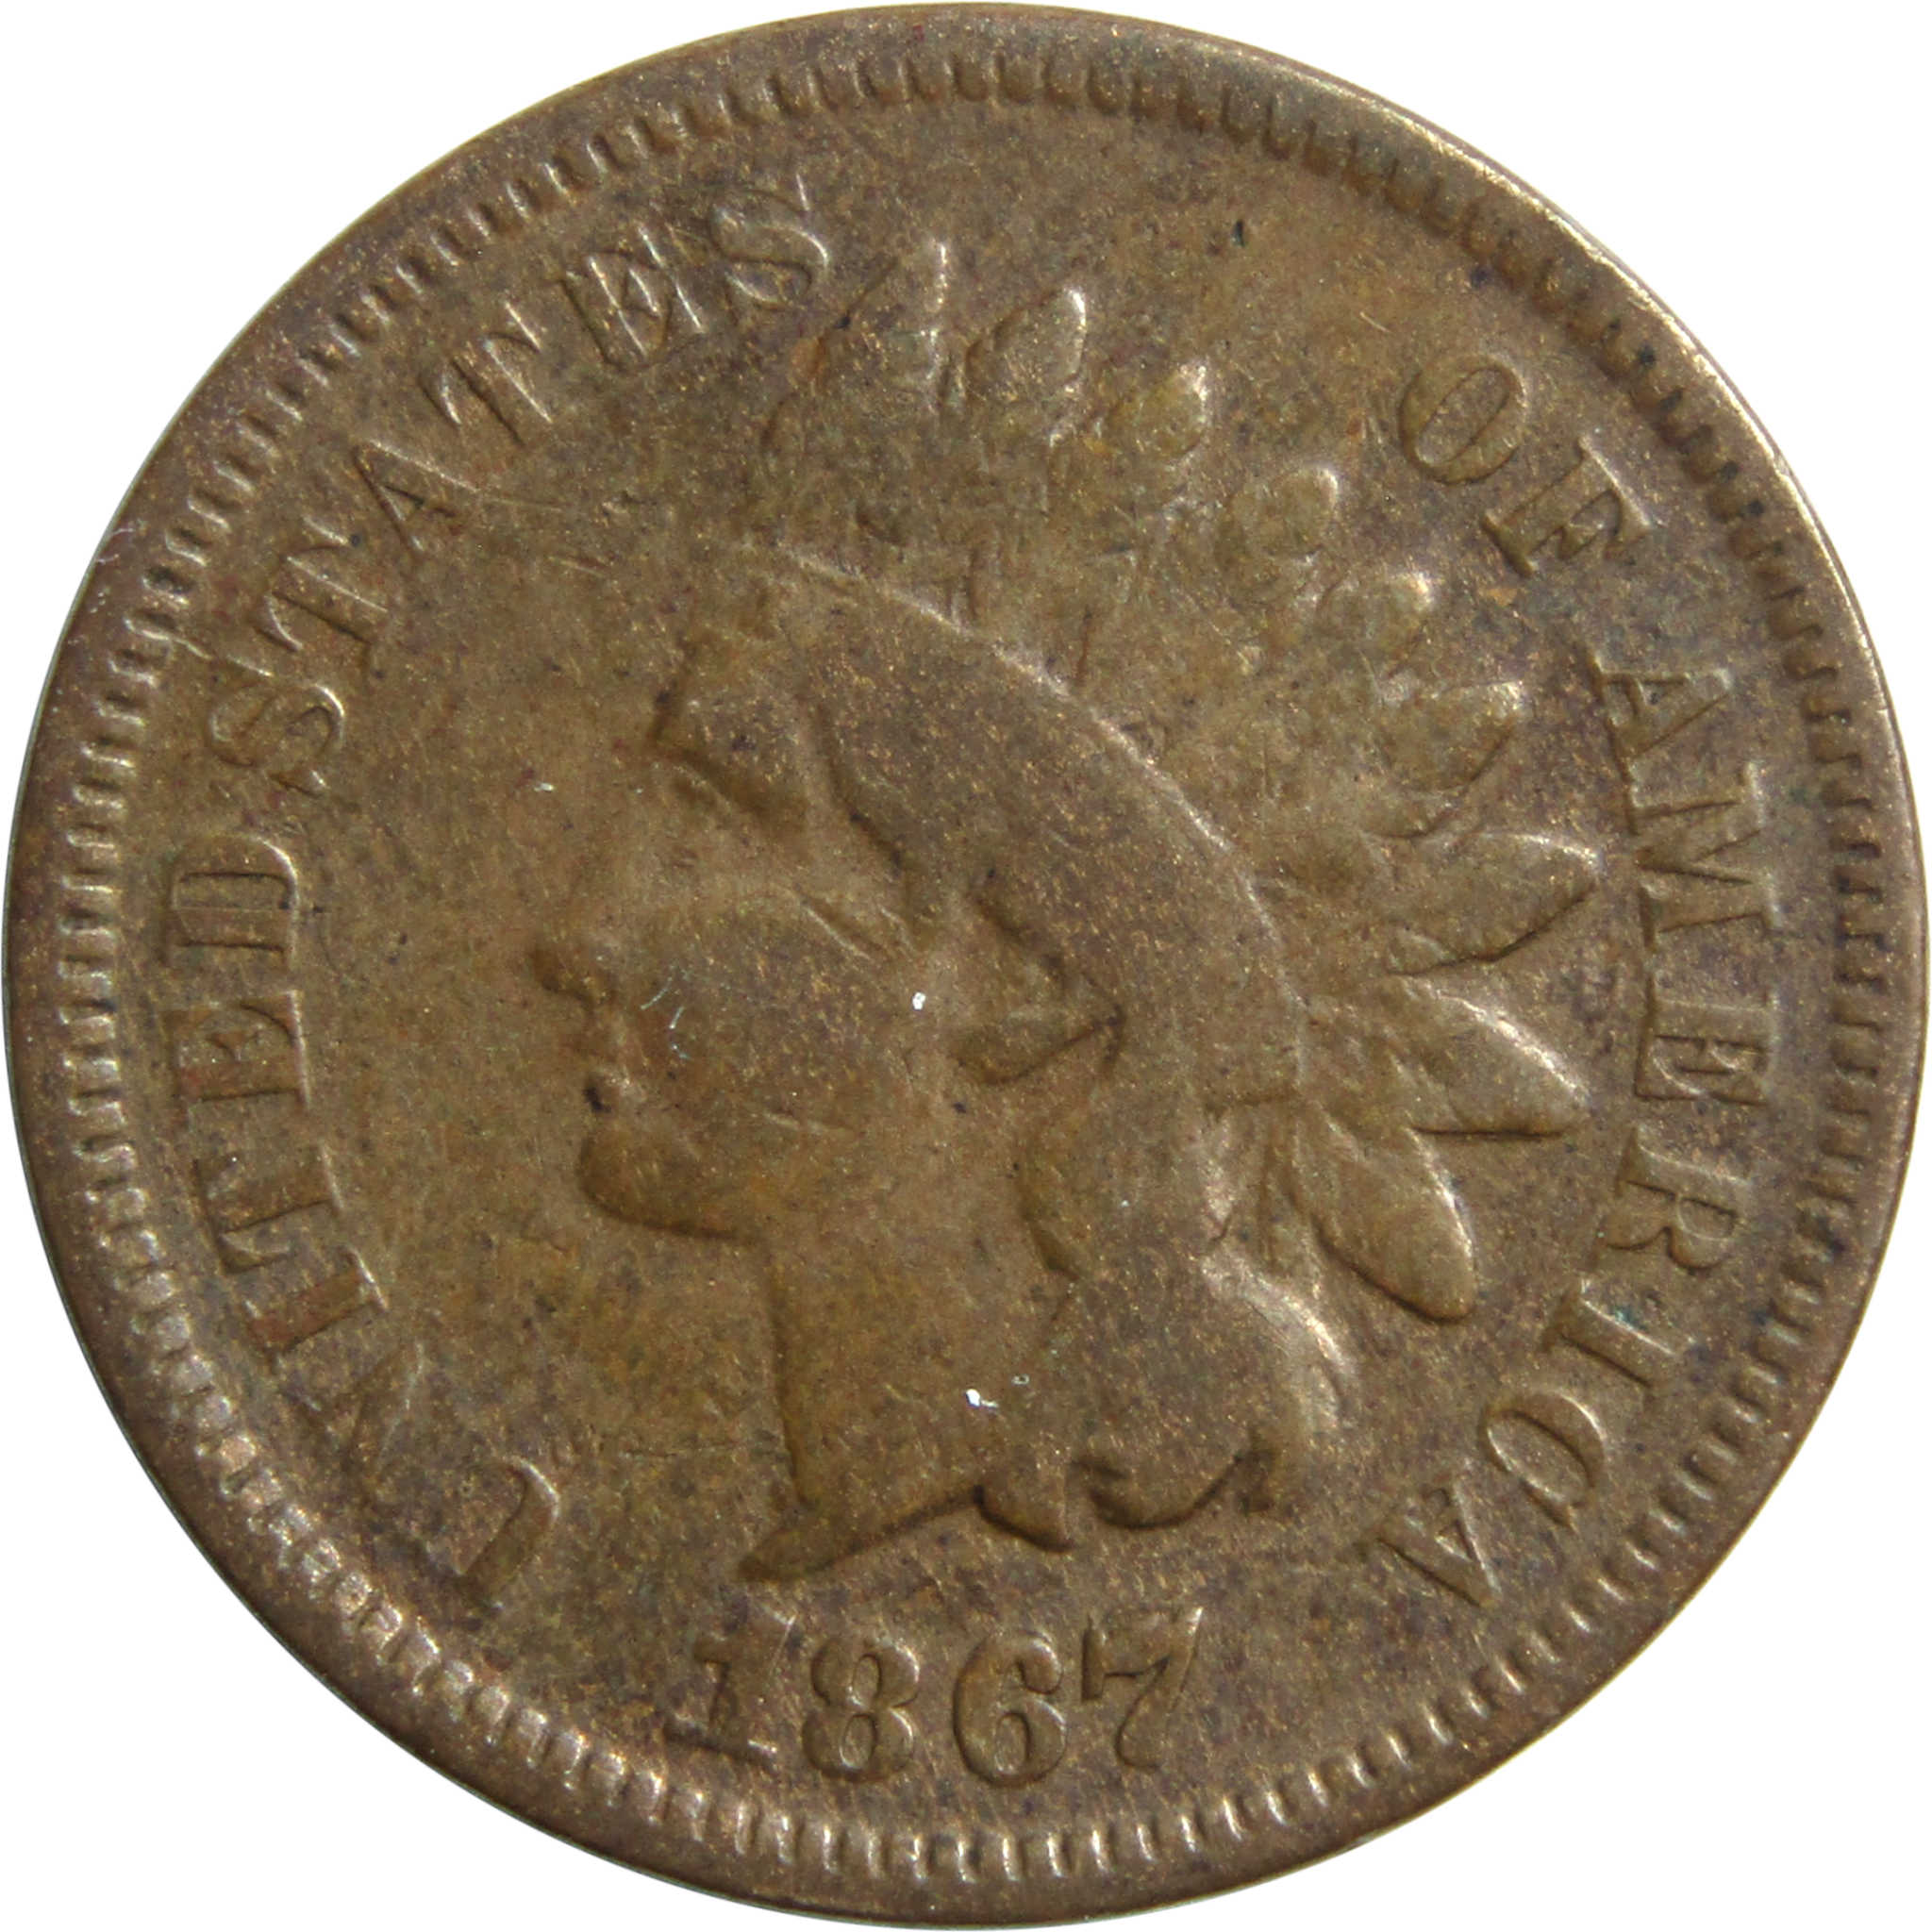 1867/67 Indian Head Cent VG Very Good Copper-Nickel Penny SKU:I13246